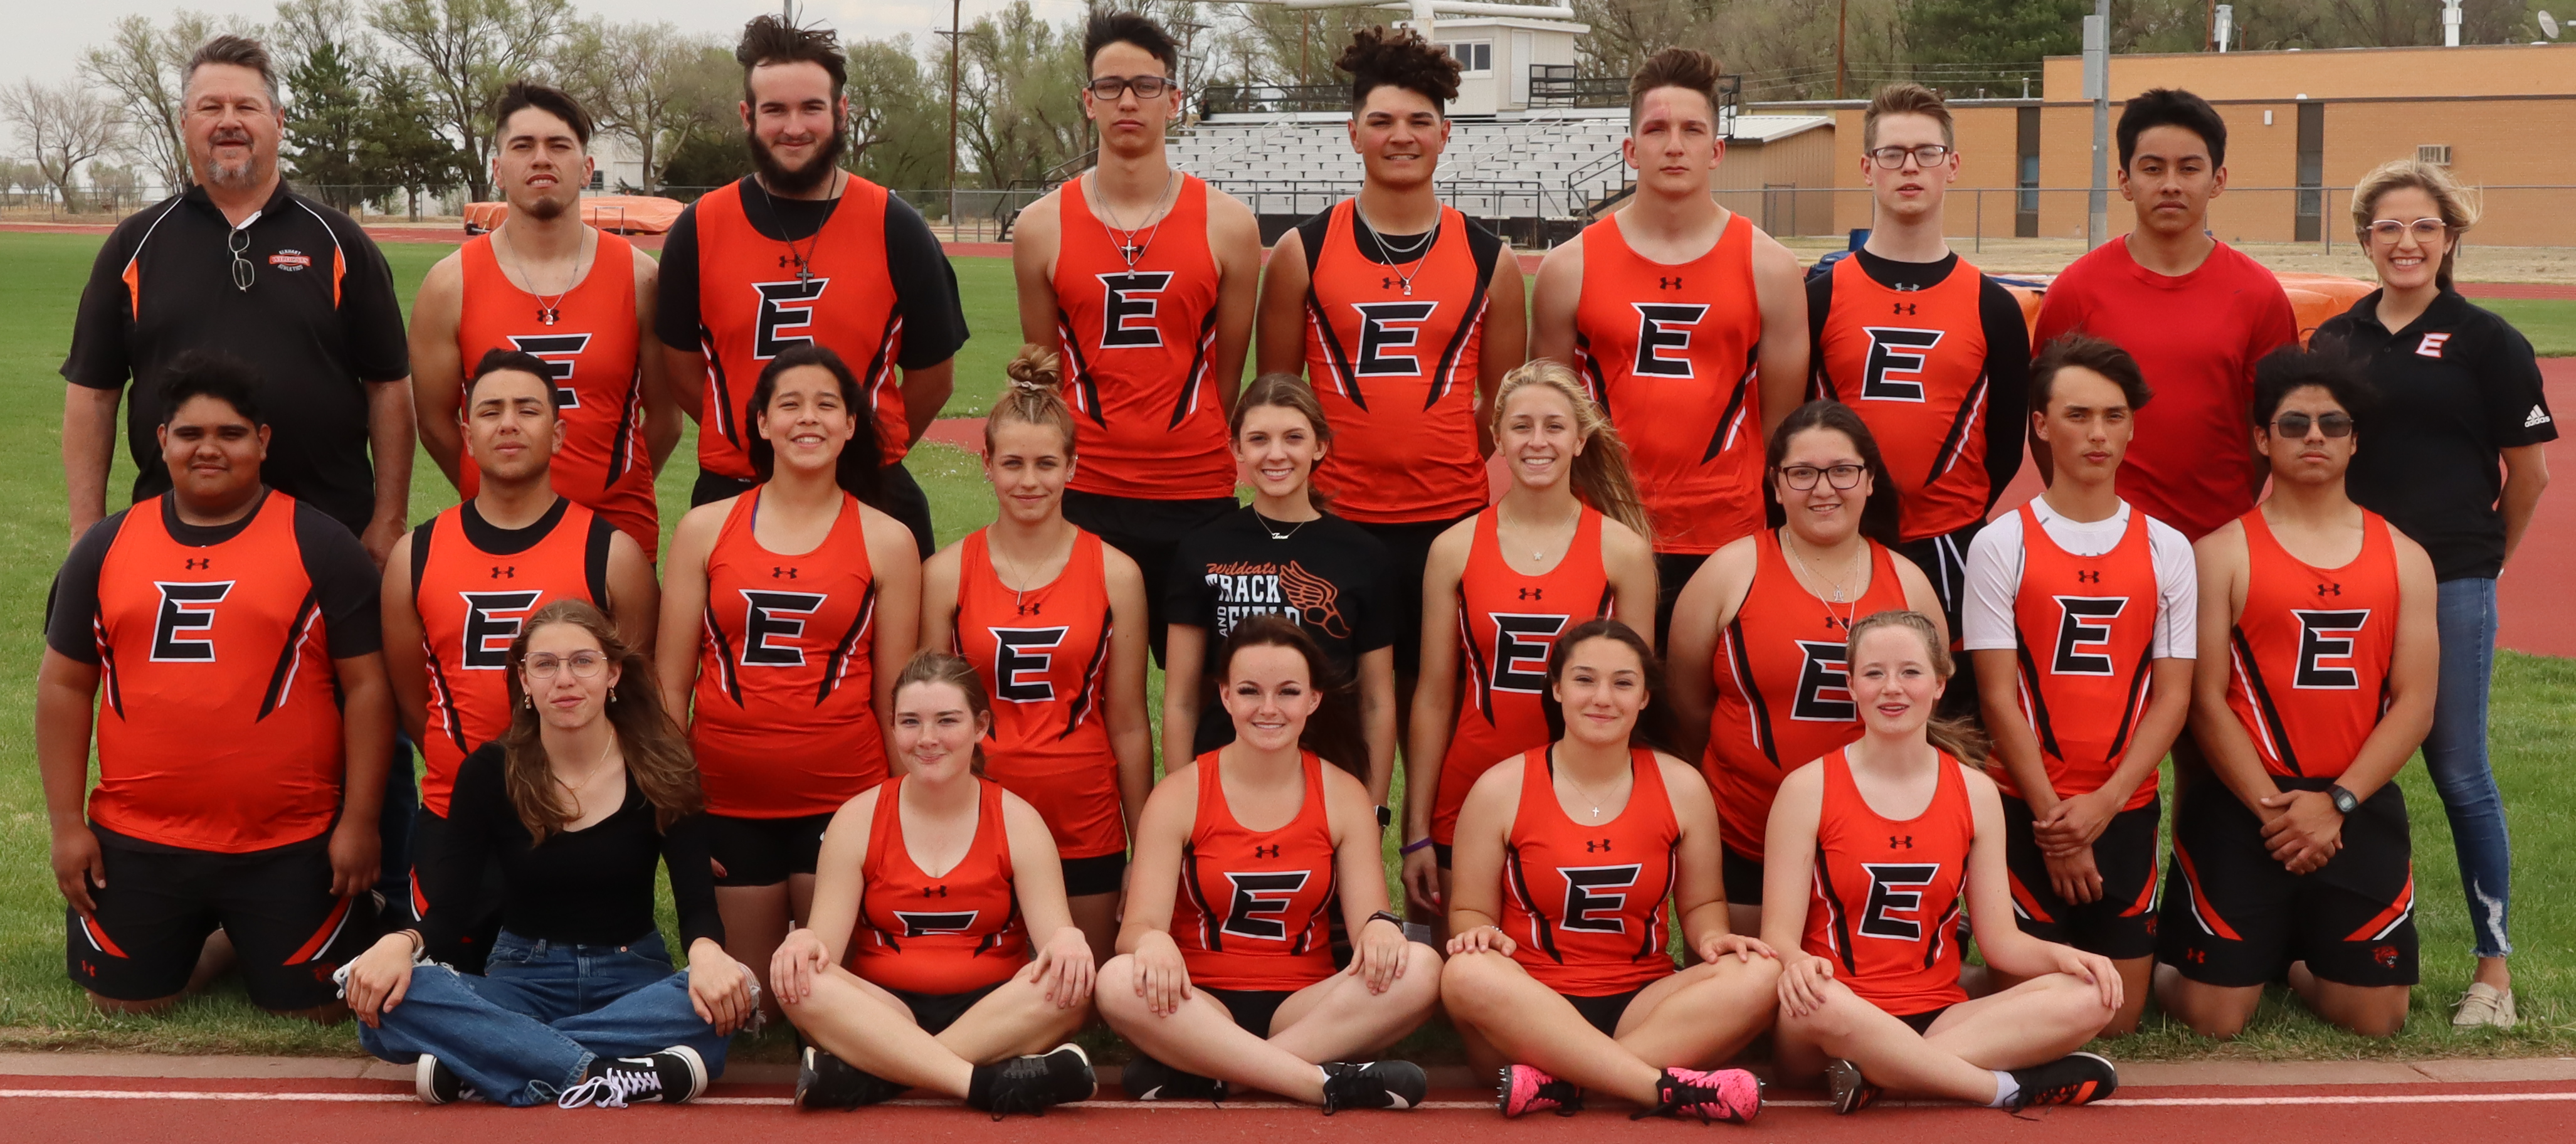 The Track team